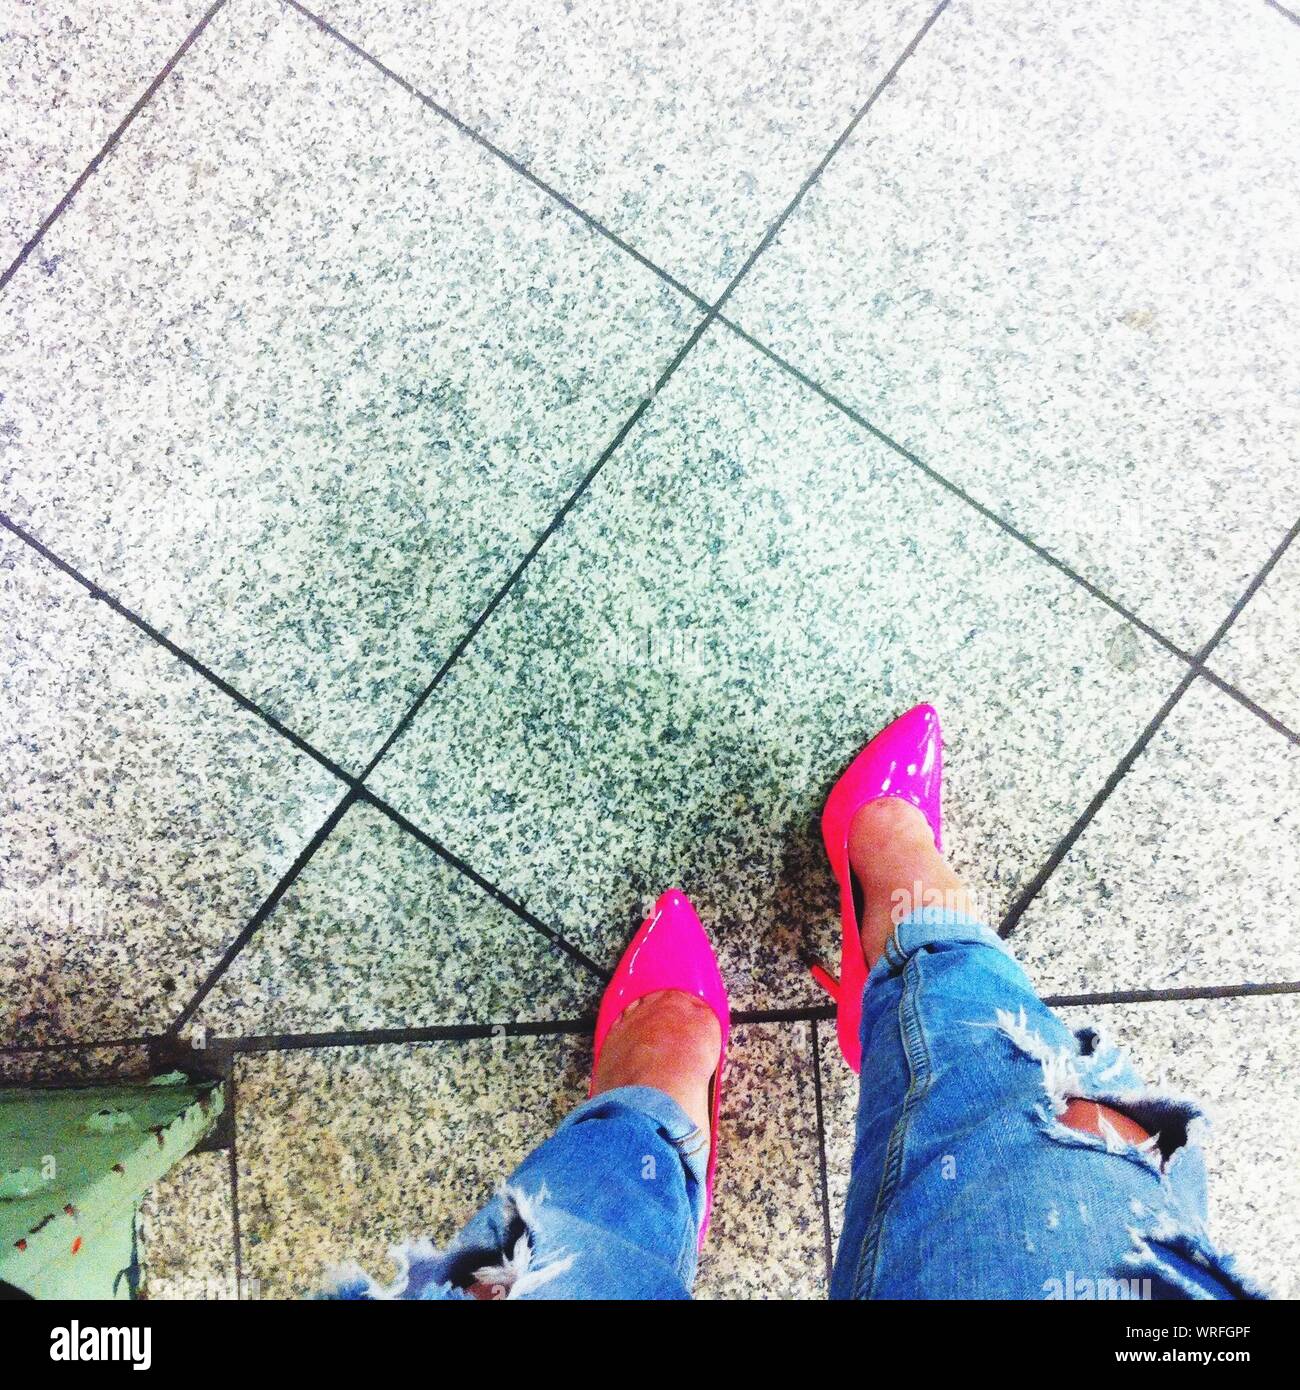 Woman's Legs With Torn Jeans And Pink High Heels Stock Photo - Alamy